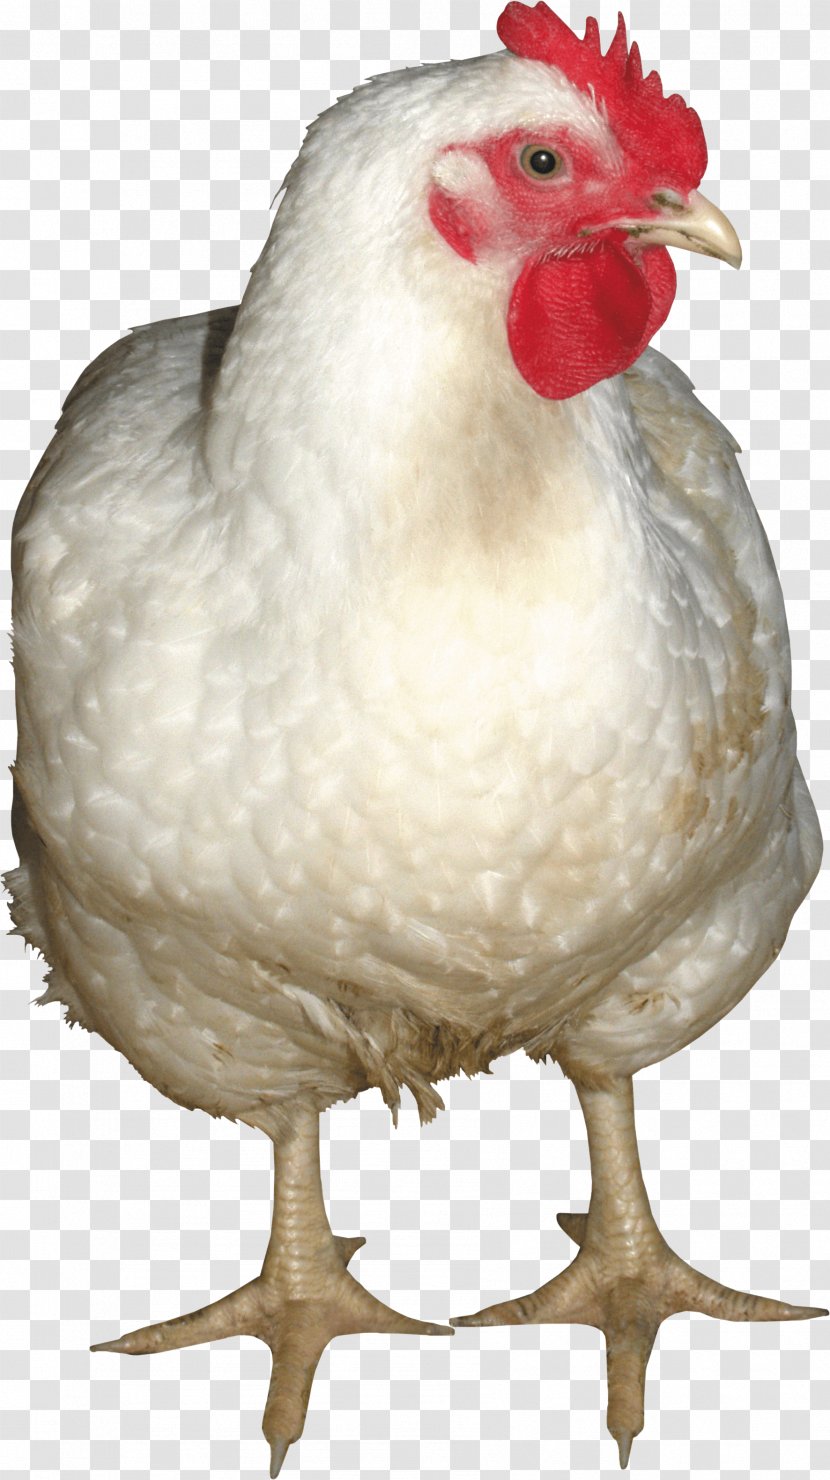 Chicken Rooster Sound Effect Freesound - Meat - White Image Transparent PNG